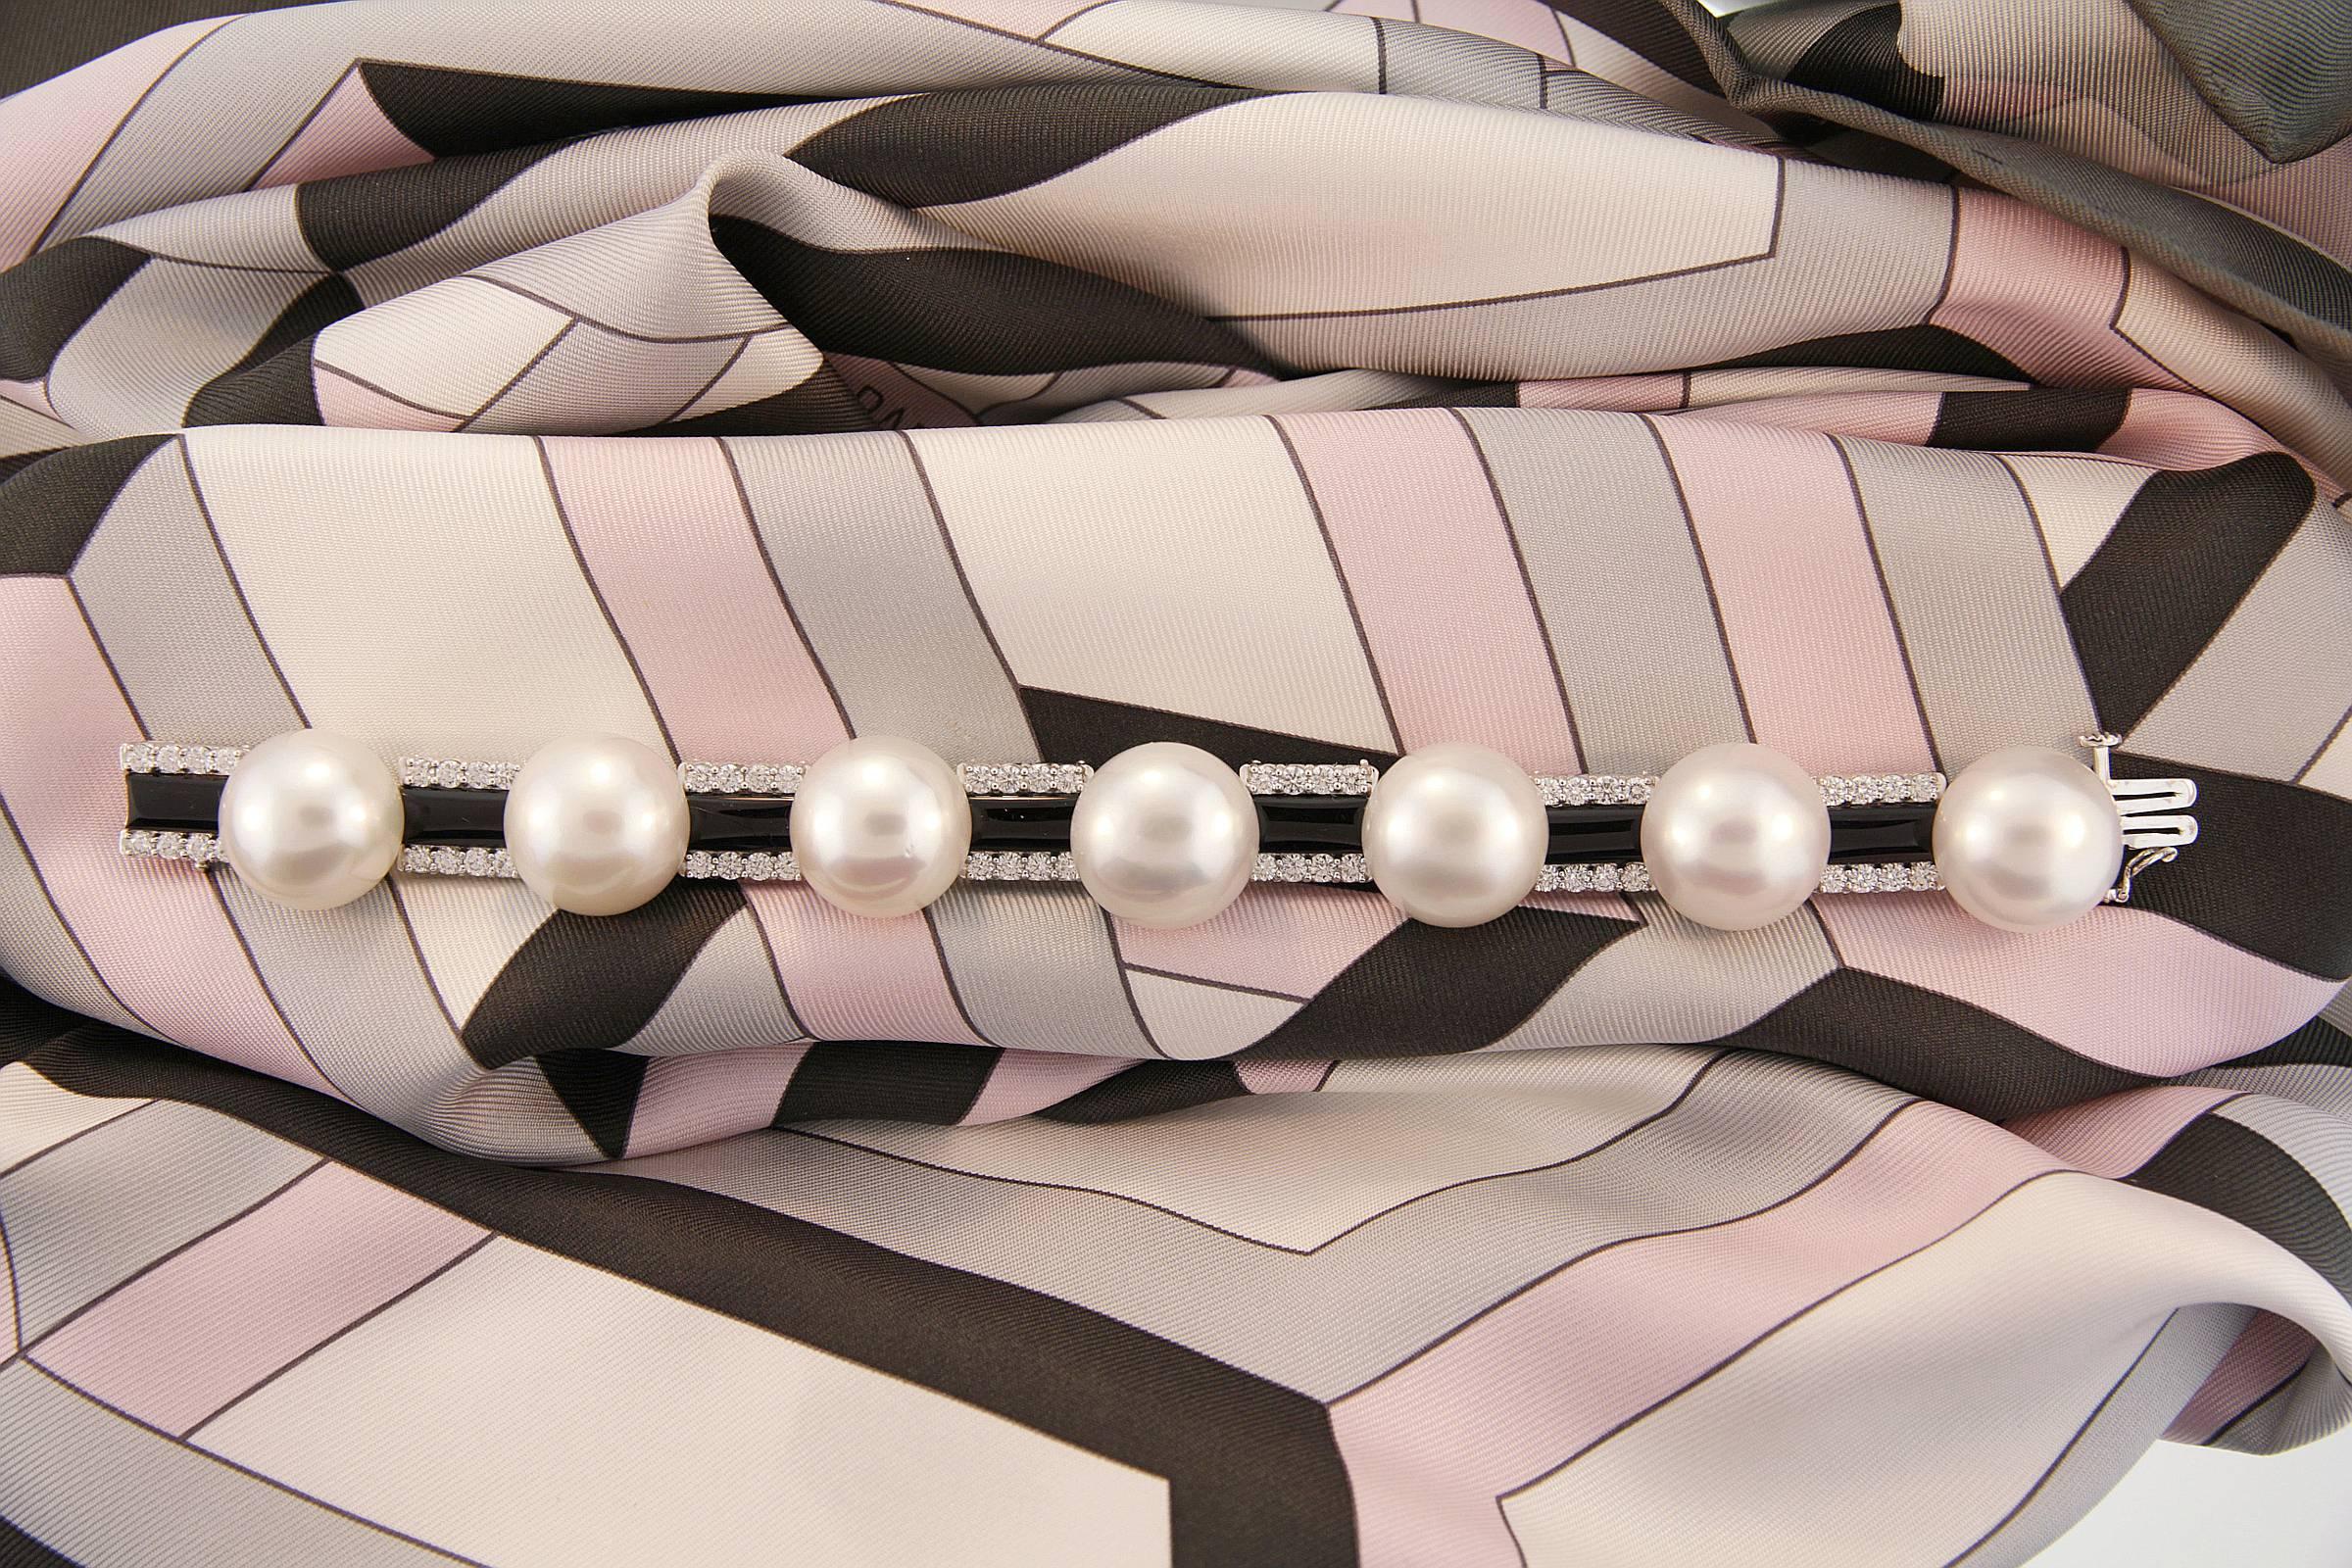 This sophisticated bracelet features seven large Australian South Sea pearls separated by seven transversal motifs in white gold.
The untreated South Sea pearls all range between 16mm and 17mm in diameter. They display a beautiful nacre and their